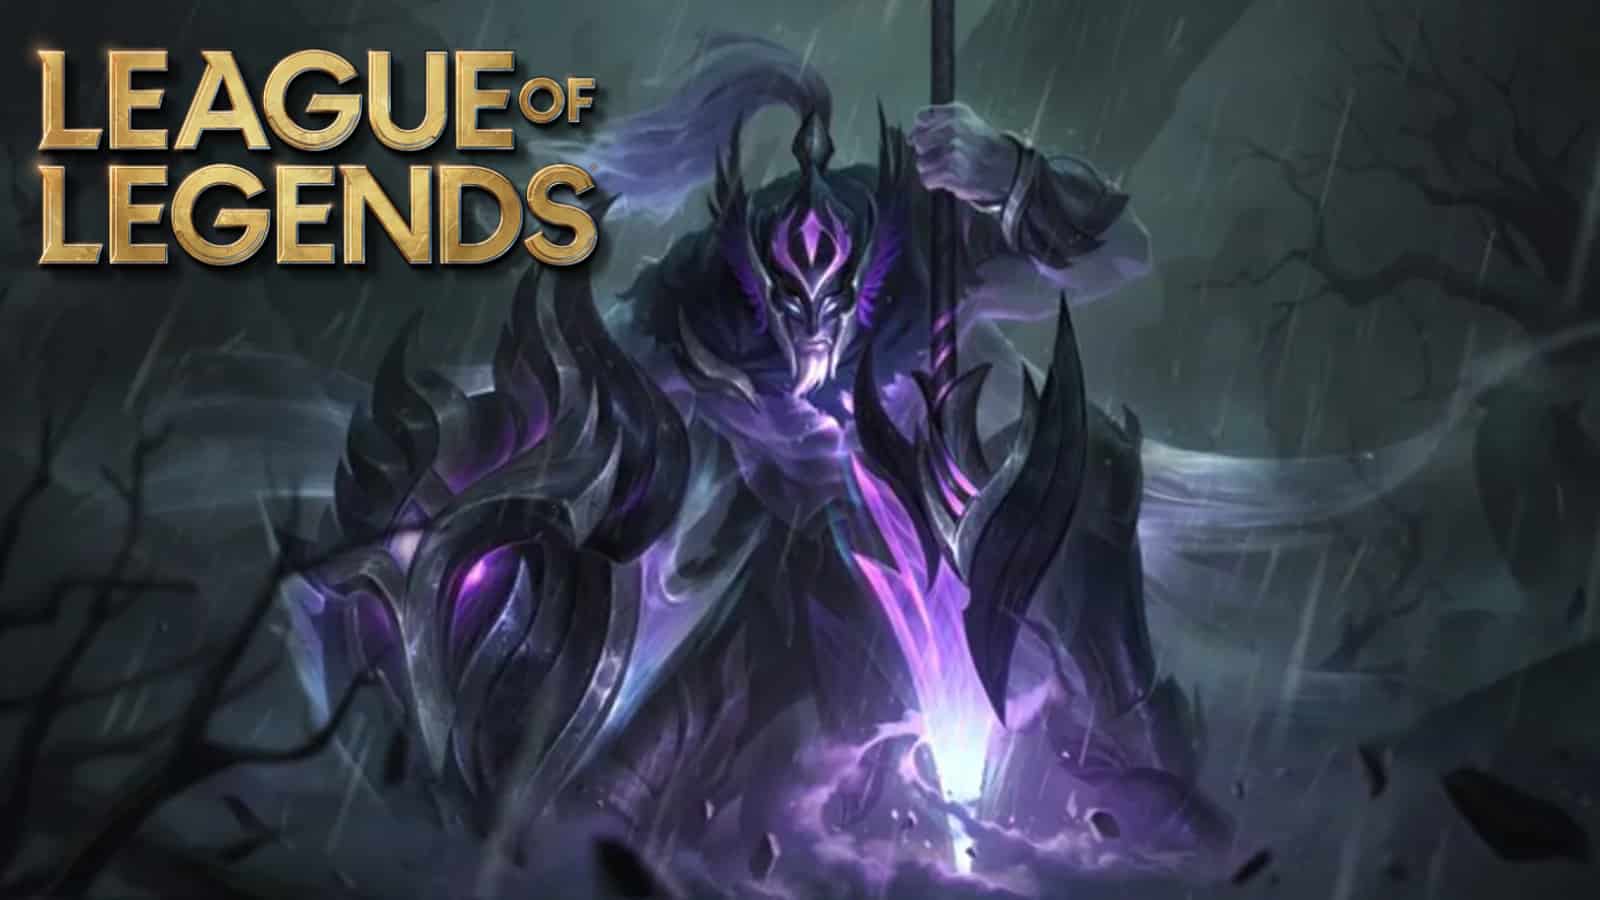 New League of Legends Prime Gaming loot available today - Dot Esports